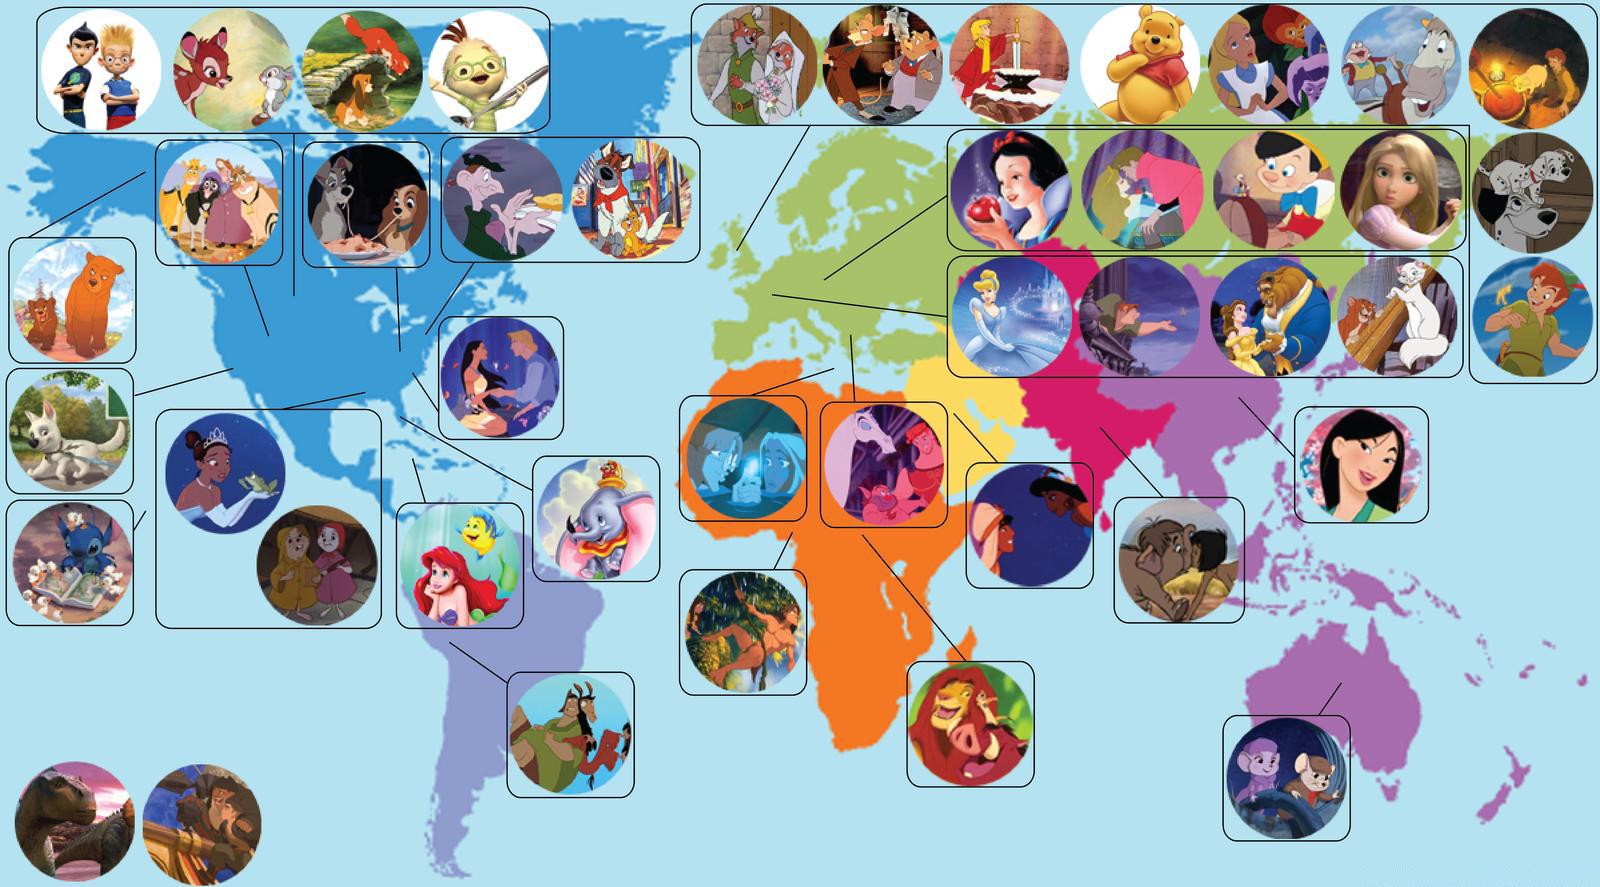 A handy guide to knowing where to find your favorite Disney stars.